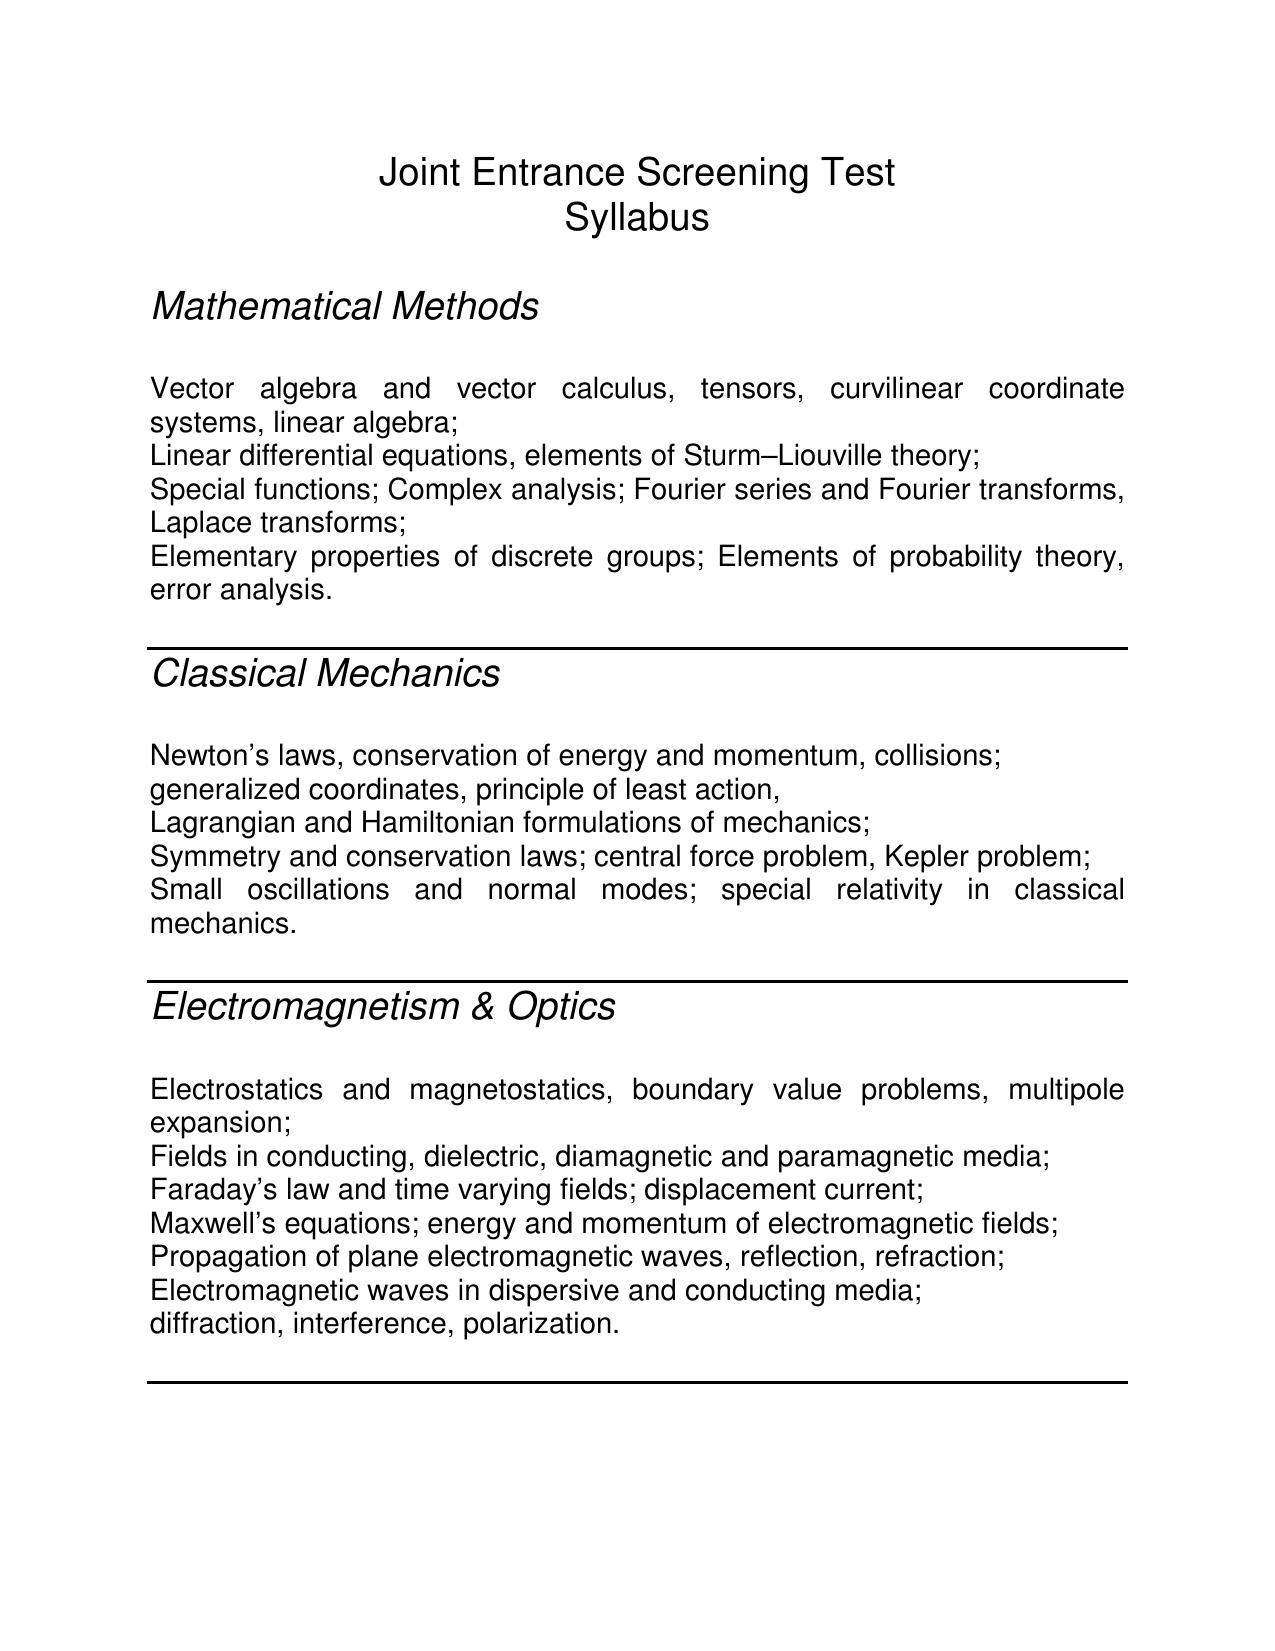 Joint Entrance Screening Test (JEST) Syllabus - Page 1